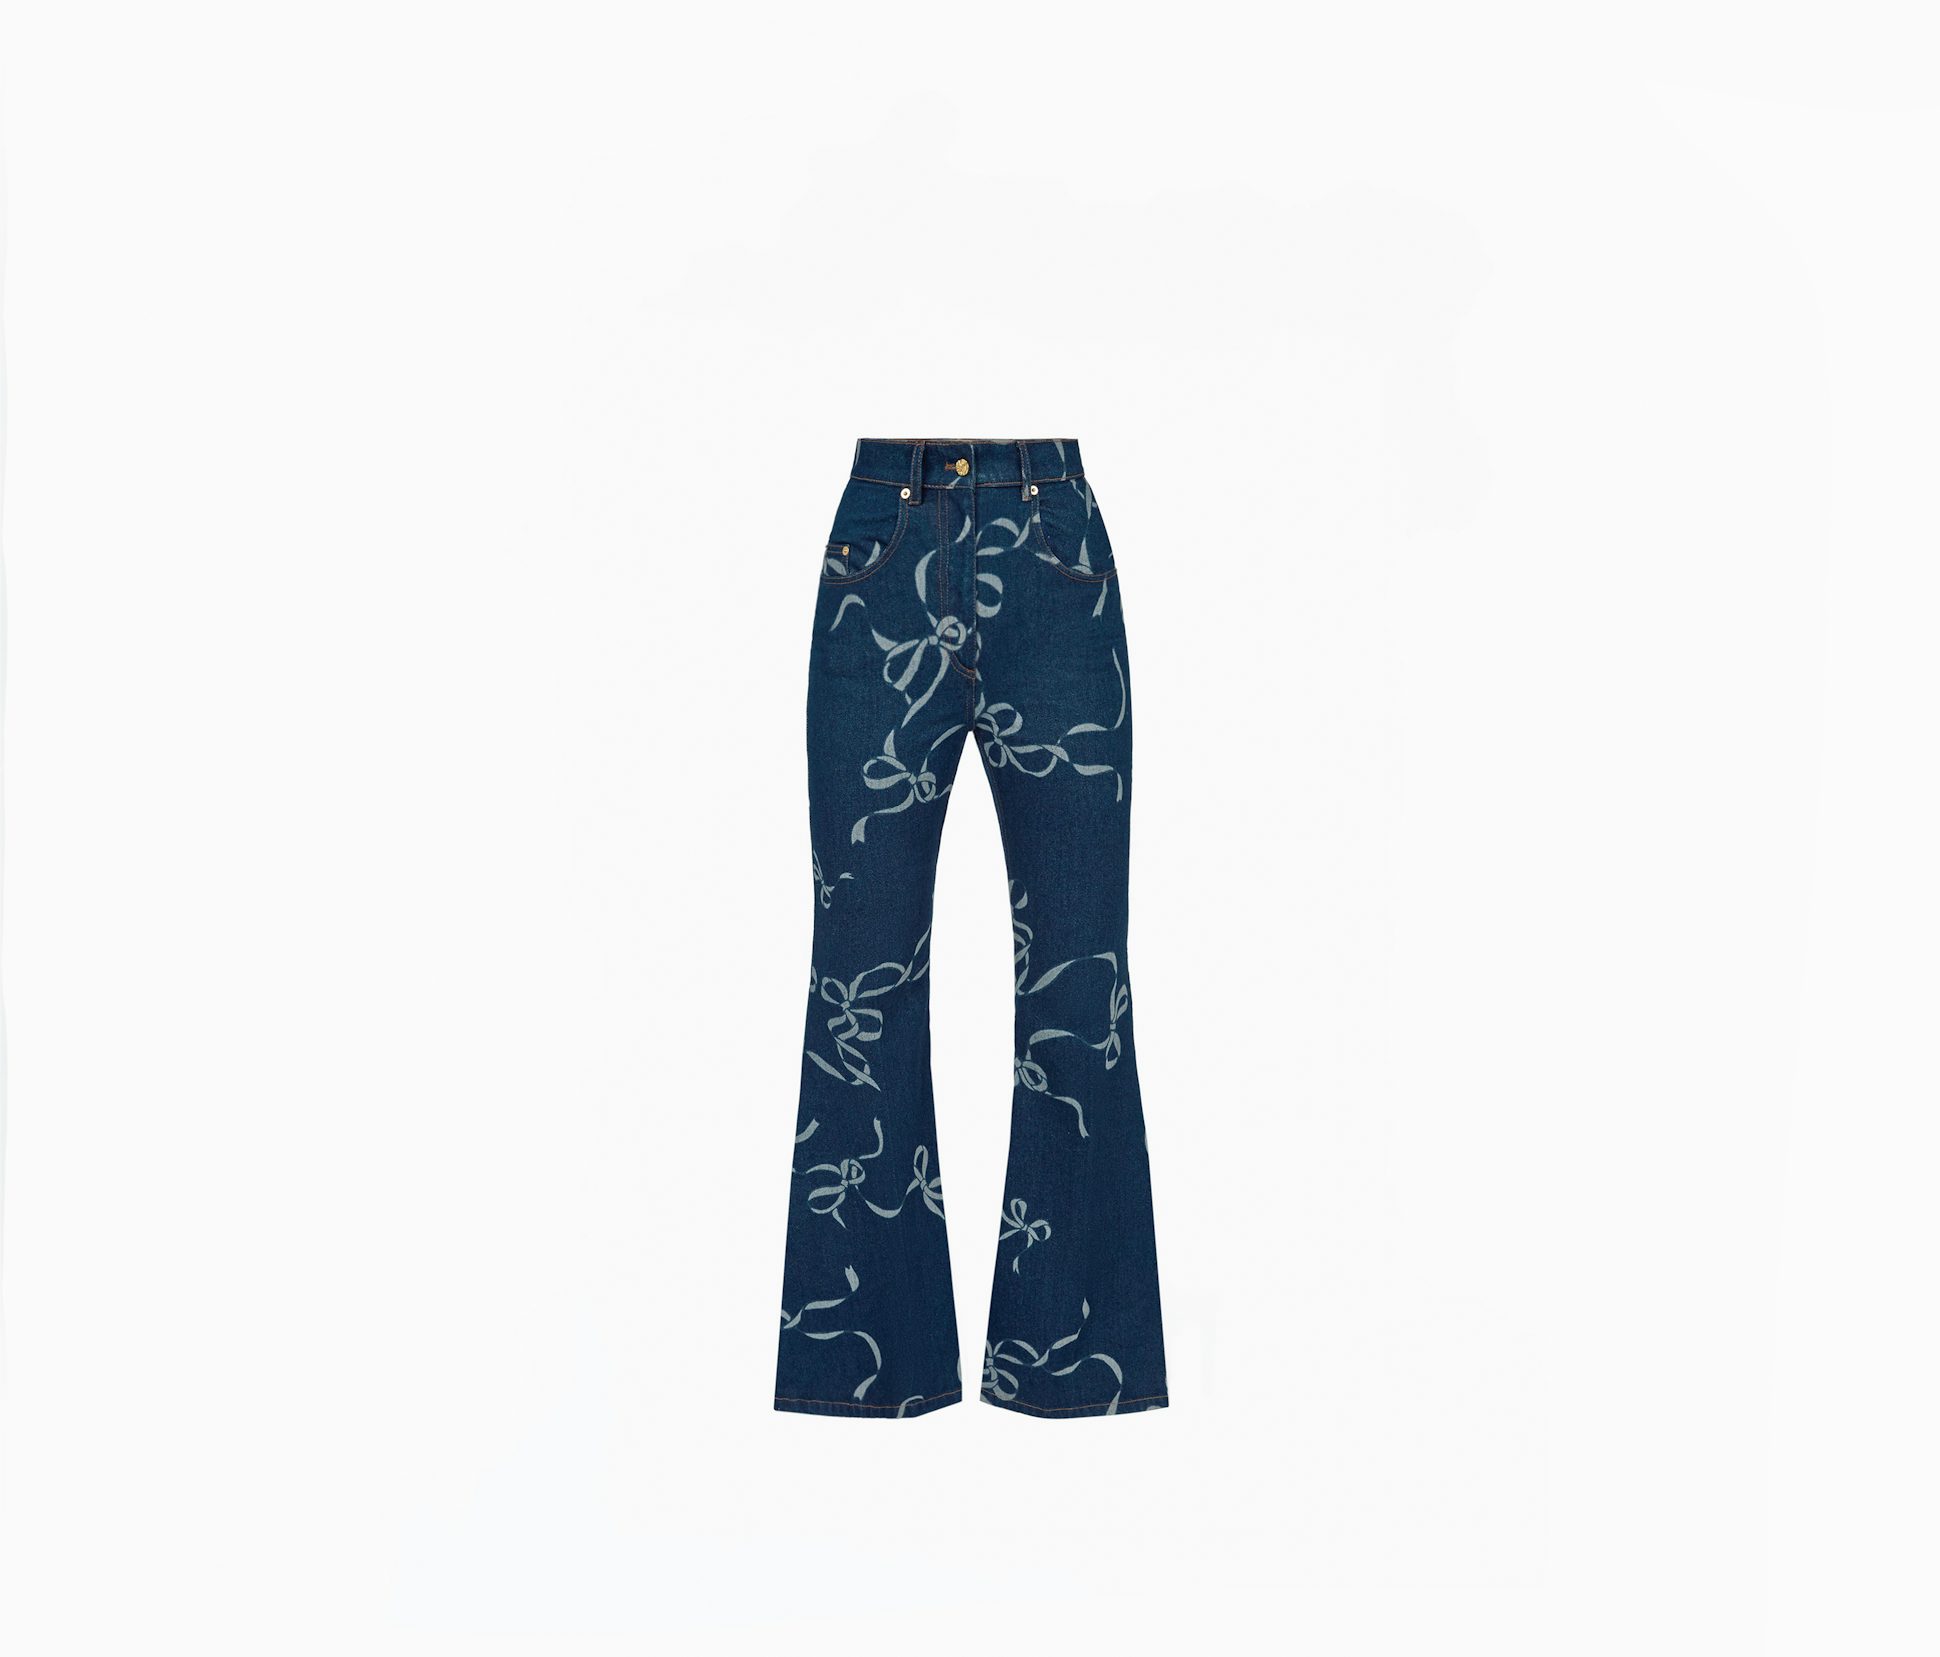 BOW-PRINT EXAGGERATED FLARE JEANS 36